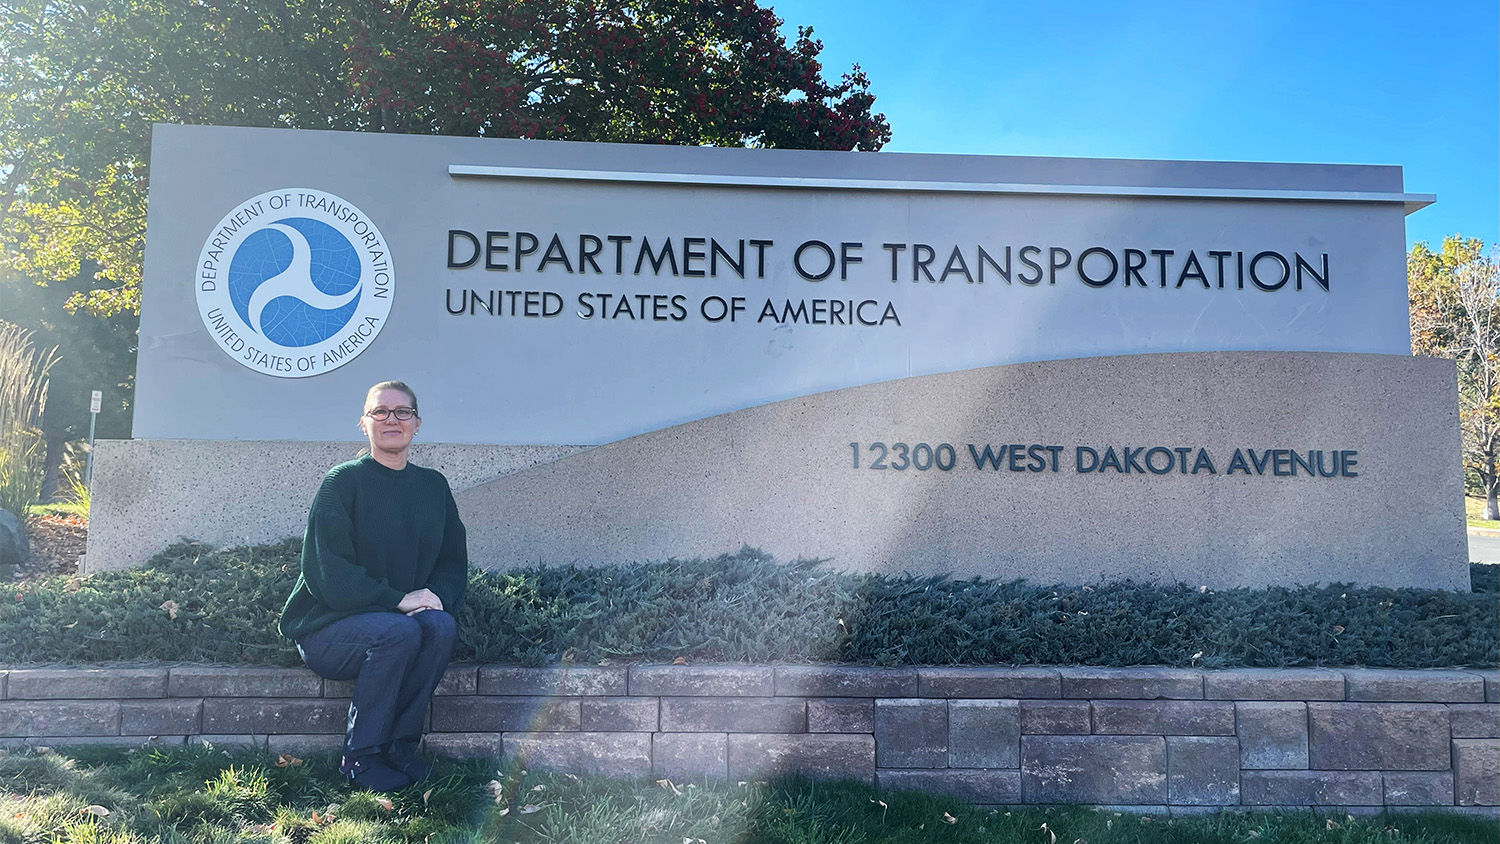 Chelly Sundermeyer sitting in front of Department of Transportation sign.